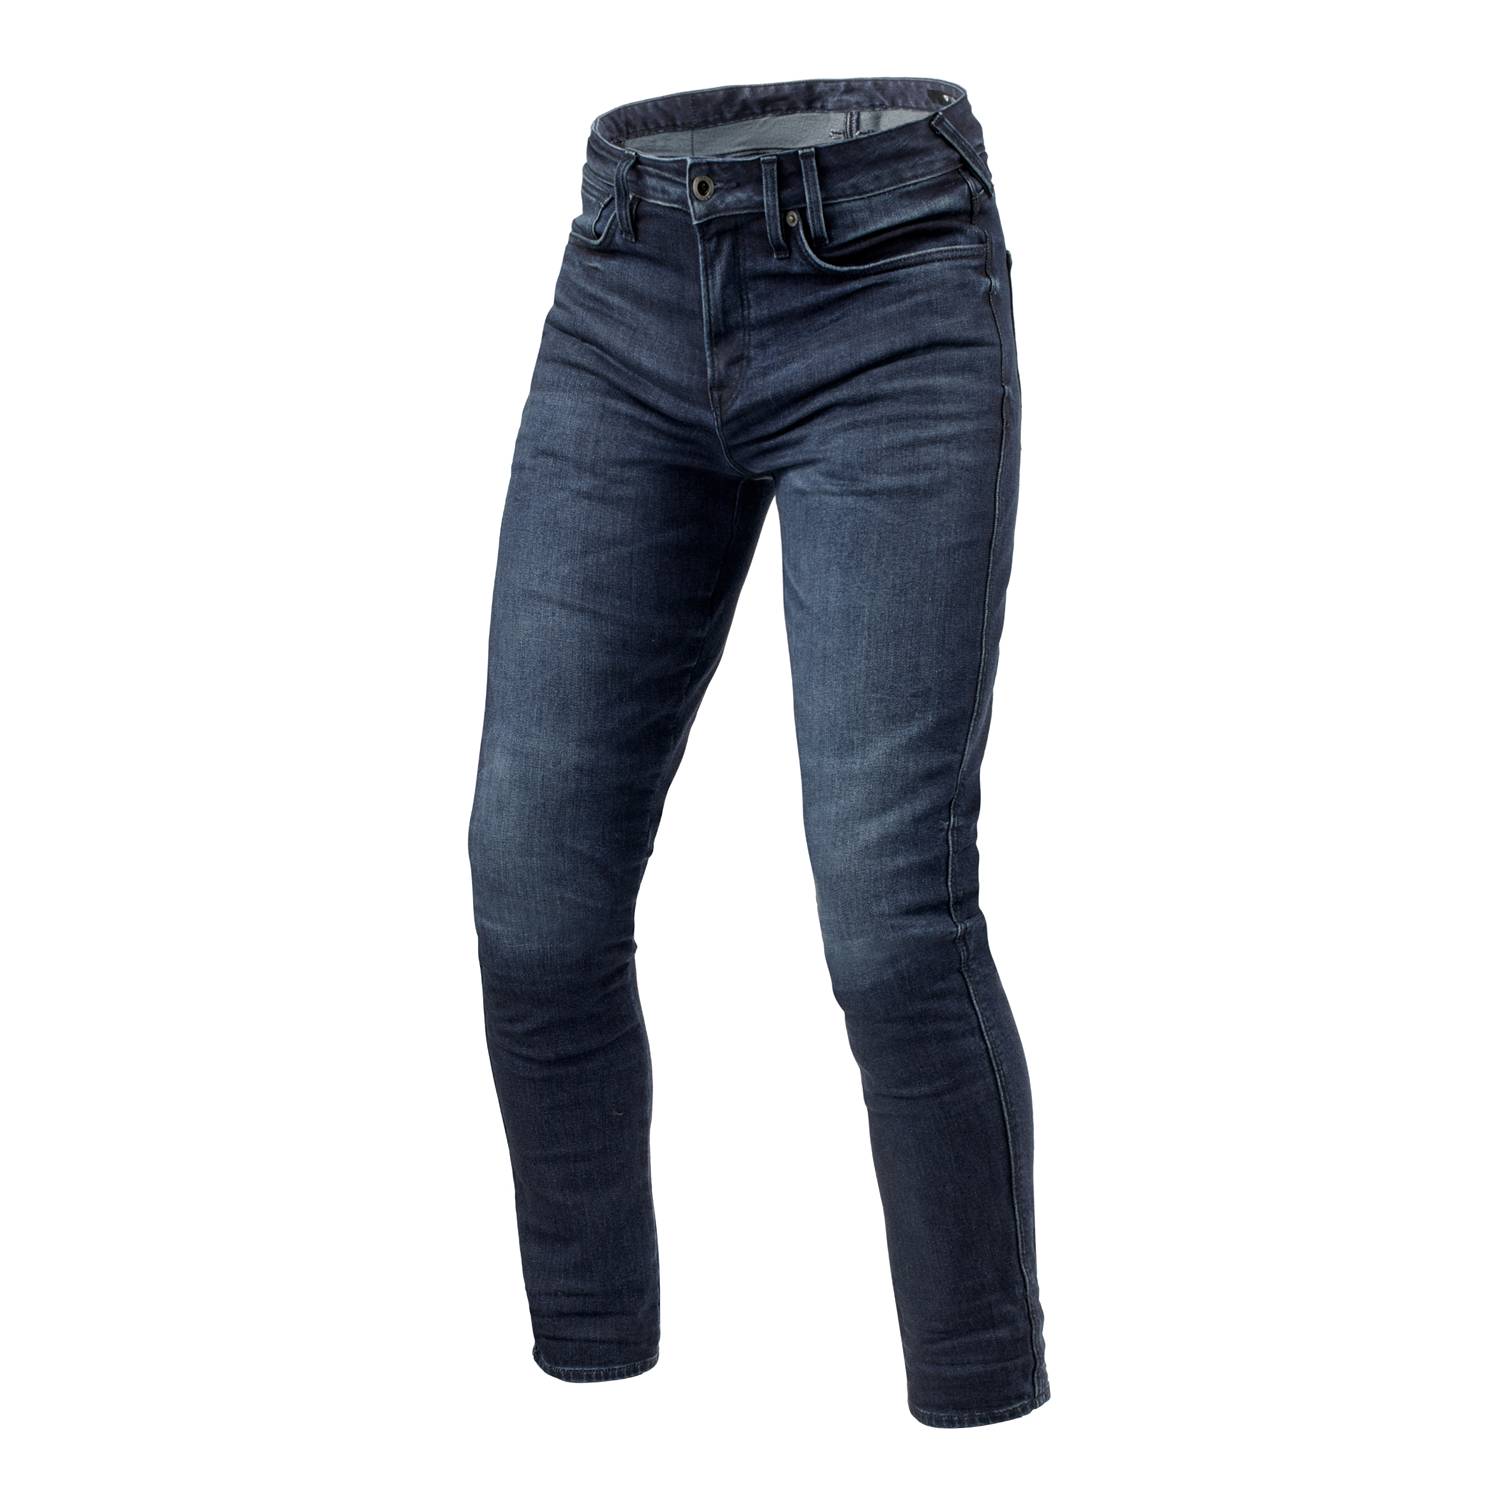 Image of REV'IT! Jeans Carlin SK Dark Blue Used L34 Motorcycle Jeans Size L34/W30 ID 8700001376389